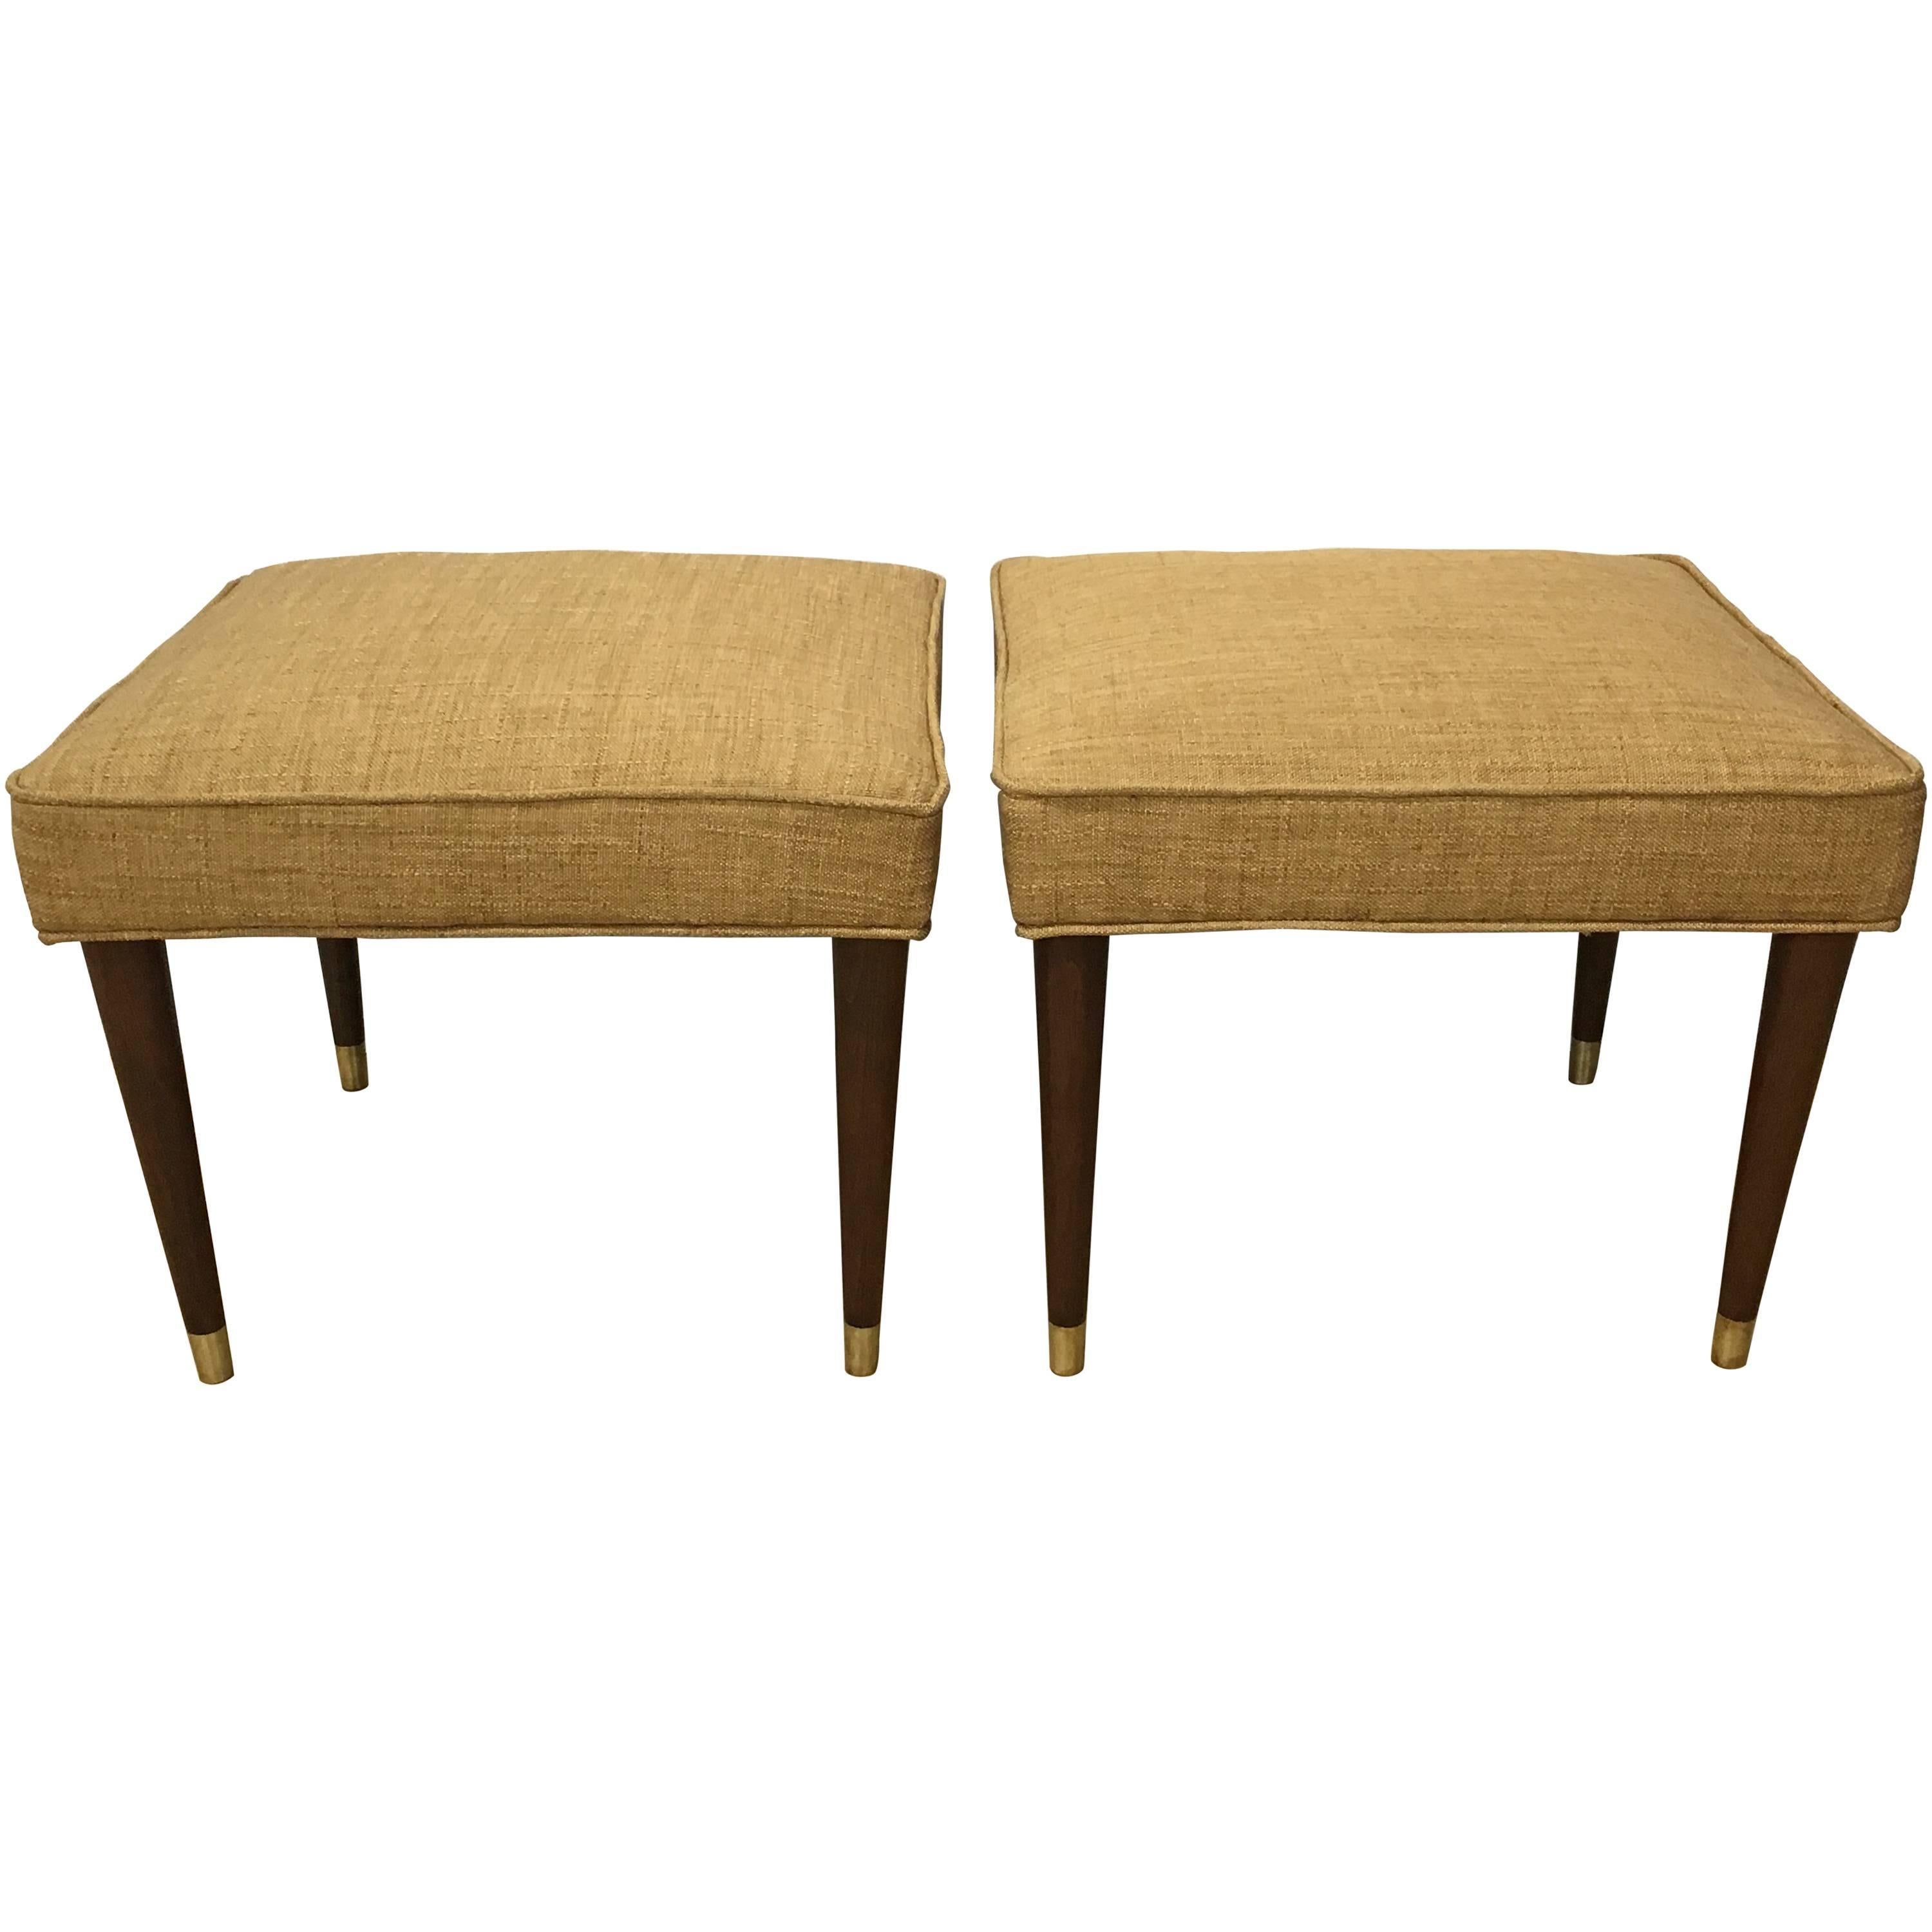 Each one of square form with upholstered seat raised on four tapering legs with brass sabots.